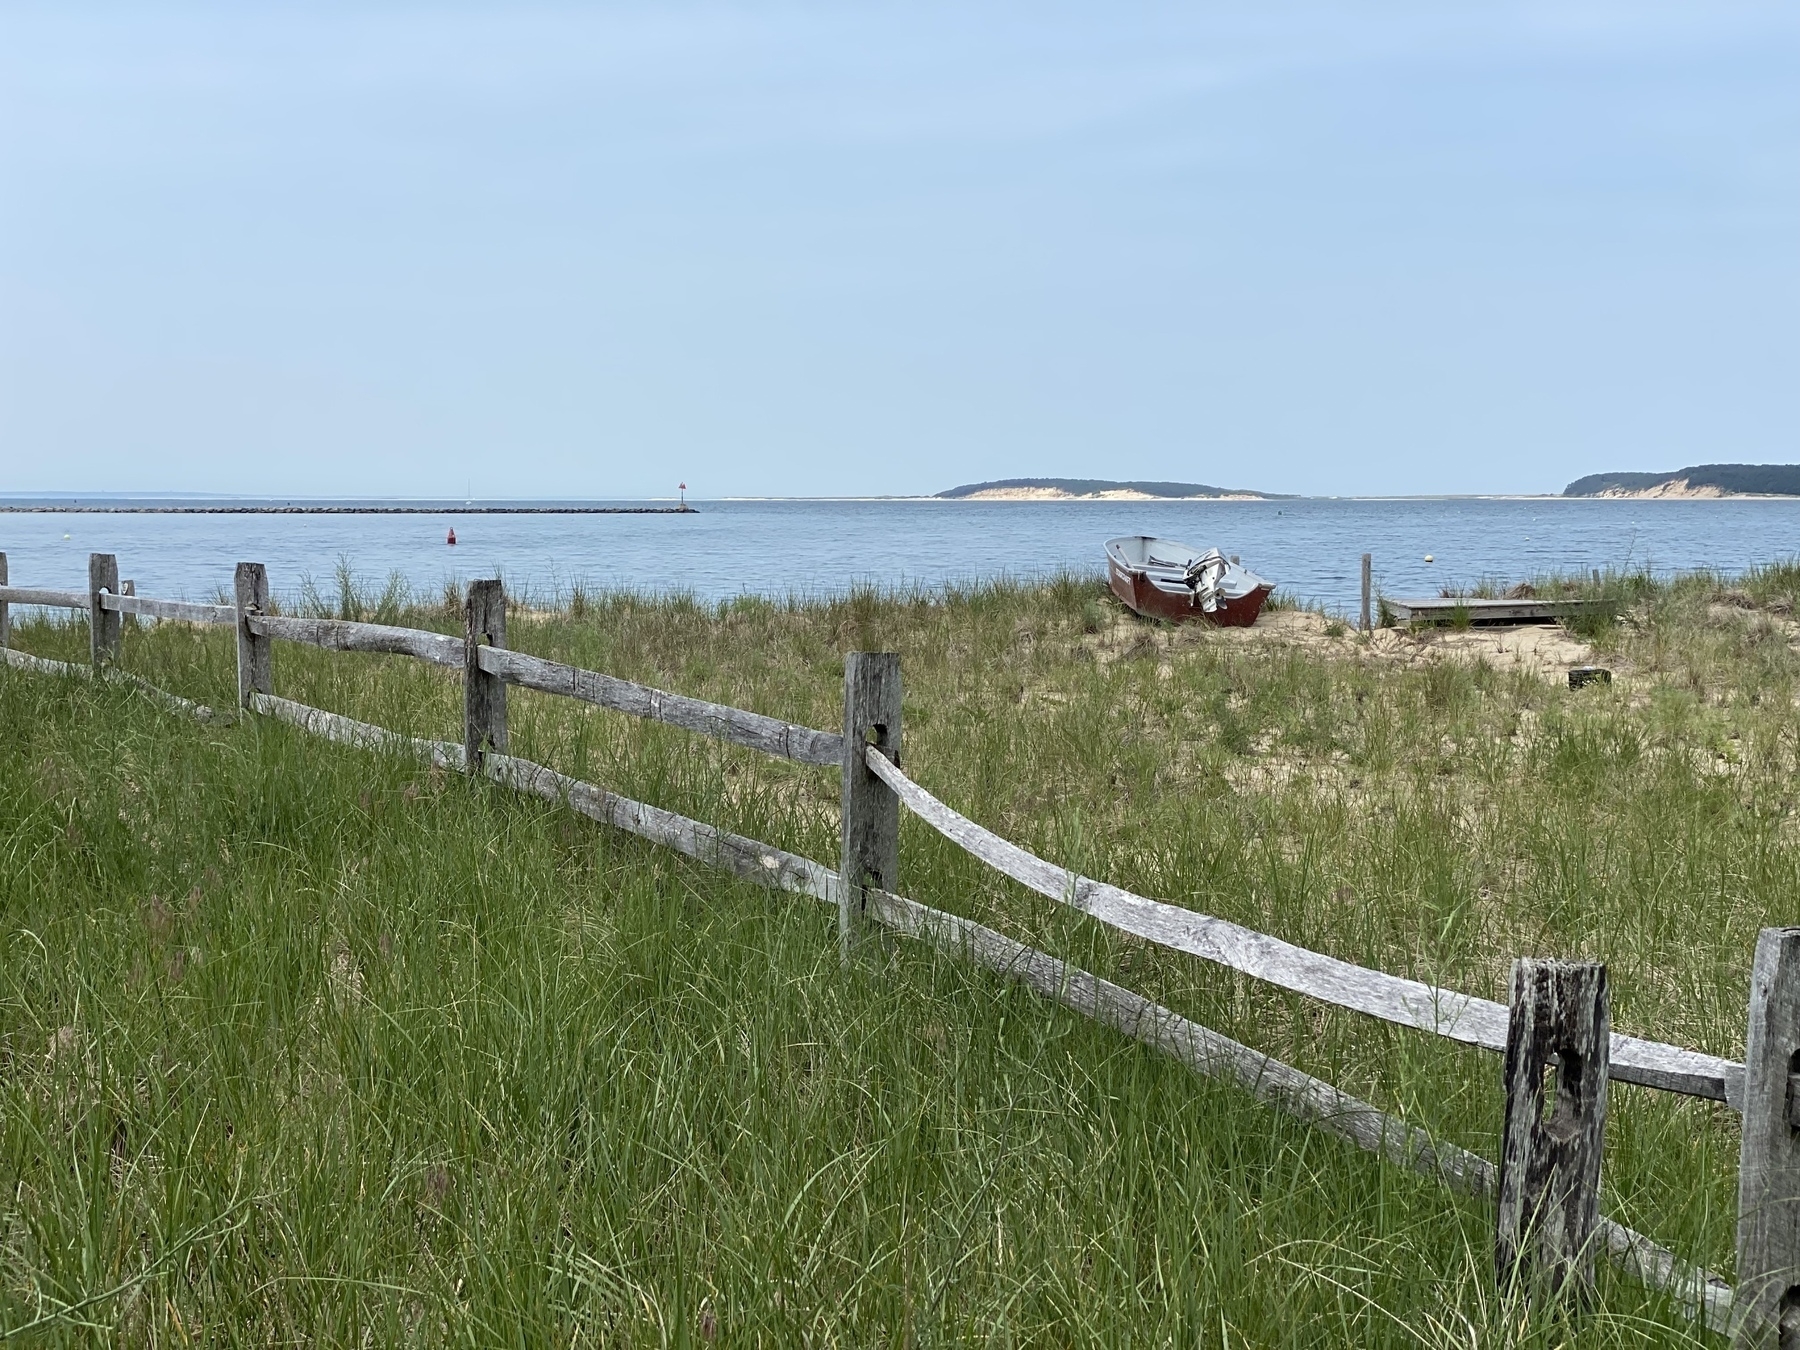 View of Wellfleet Bay with a wooden fence in the foreground.